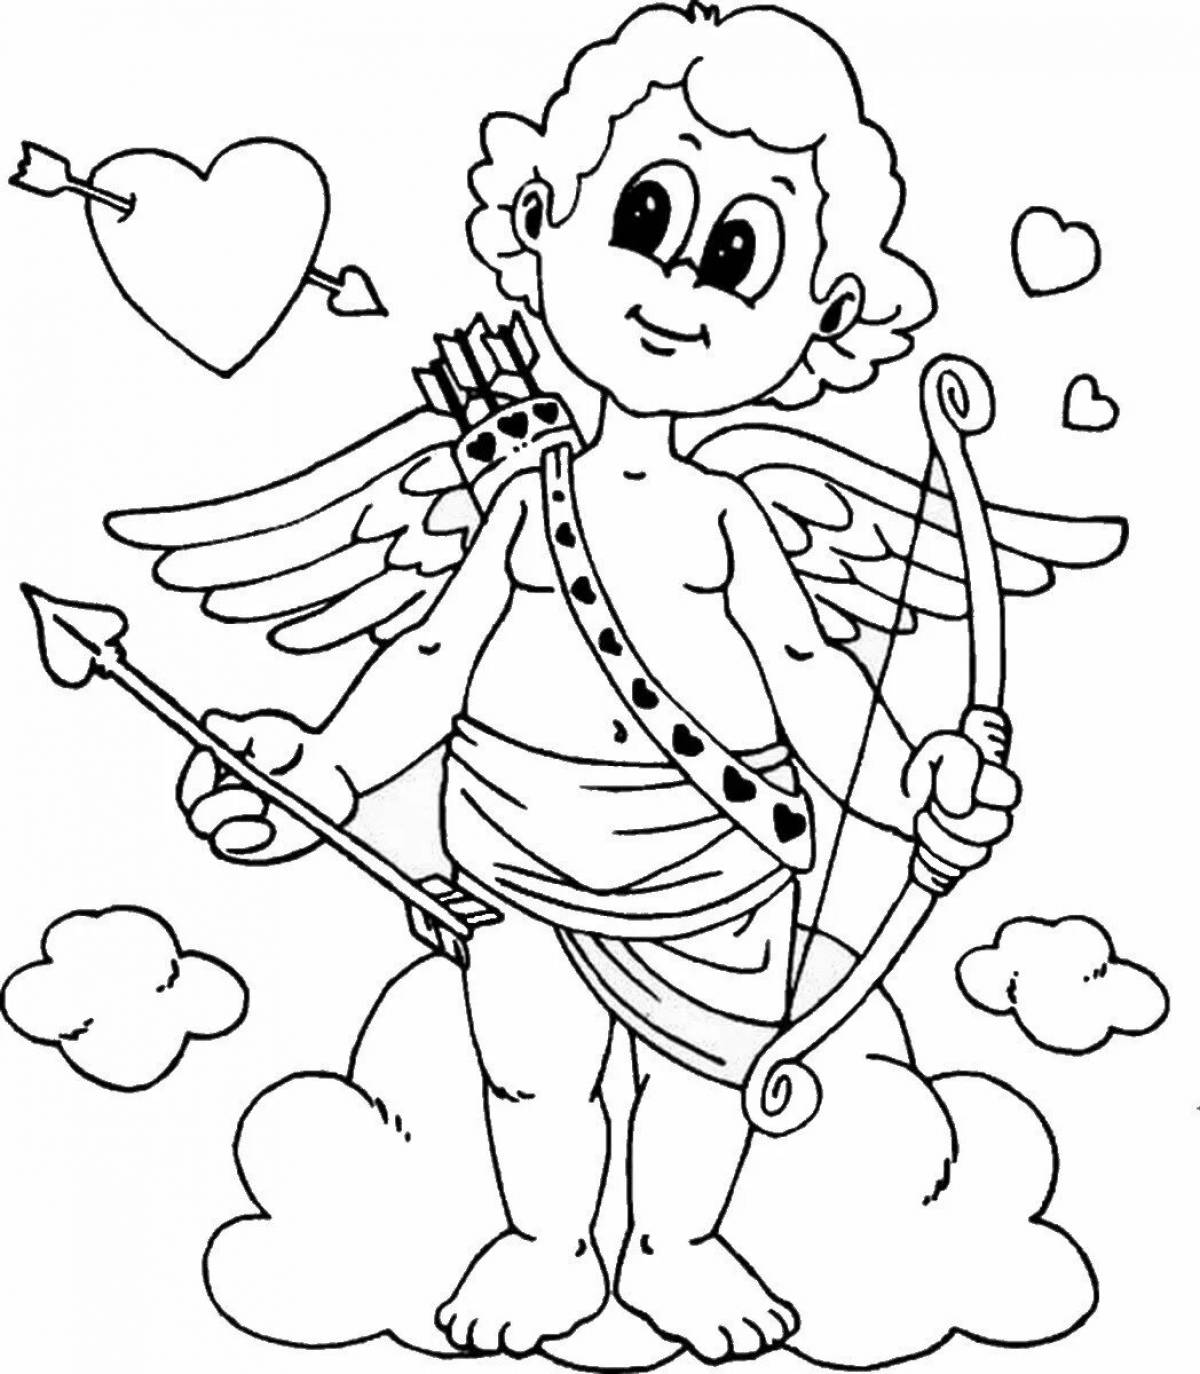 Coloring book gorgeous cupid